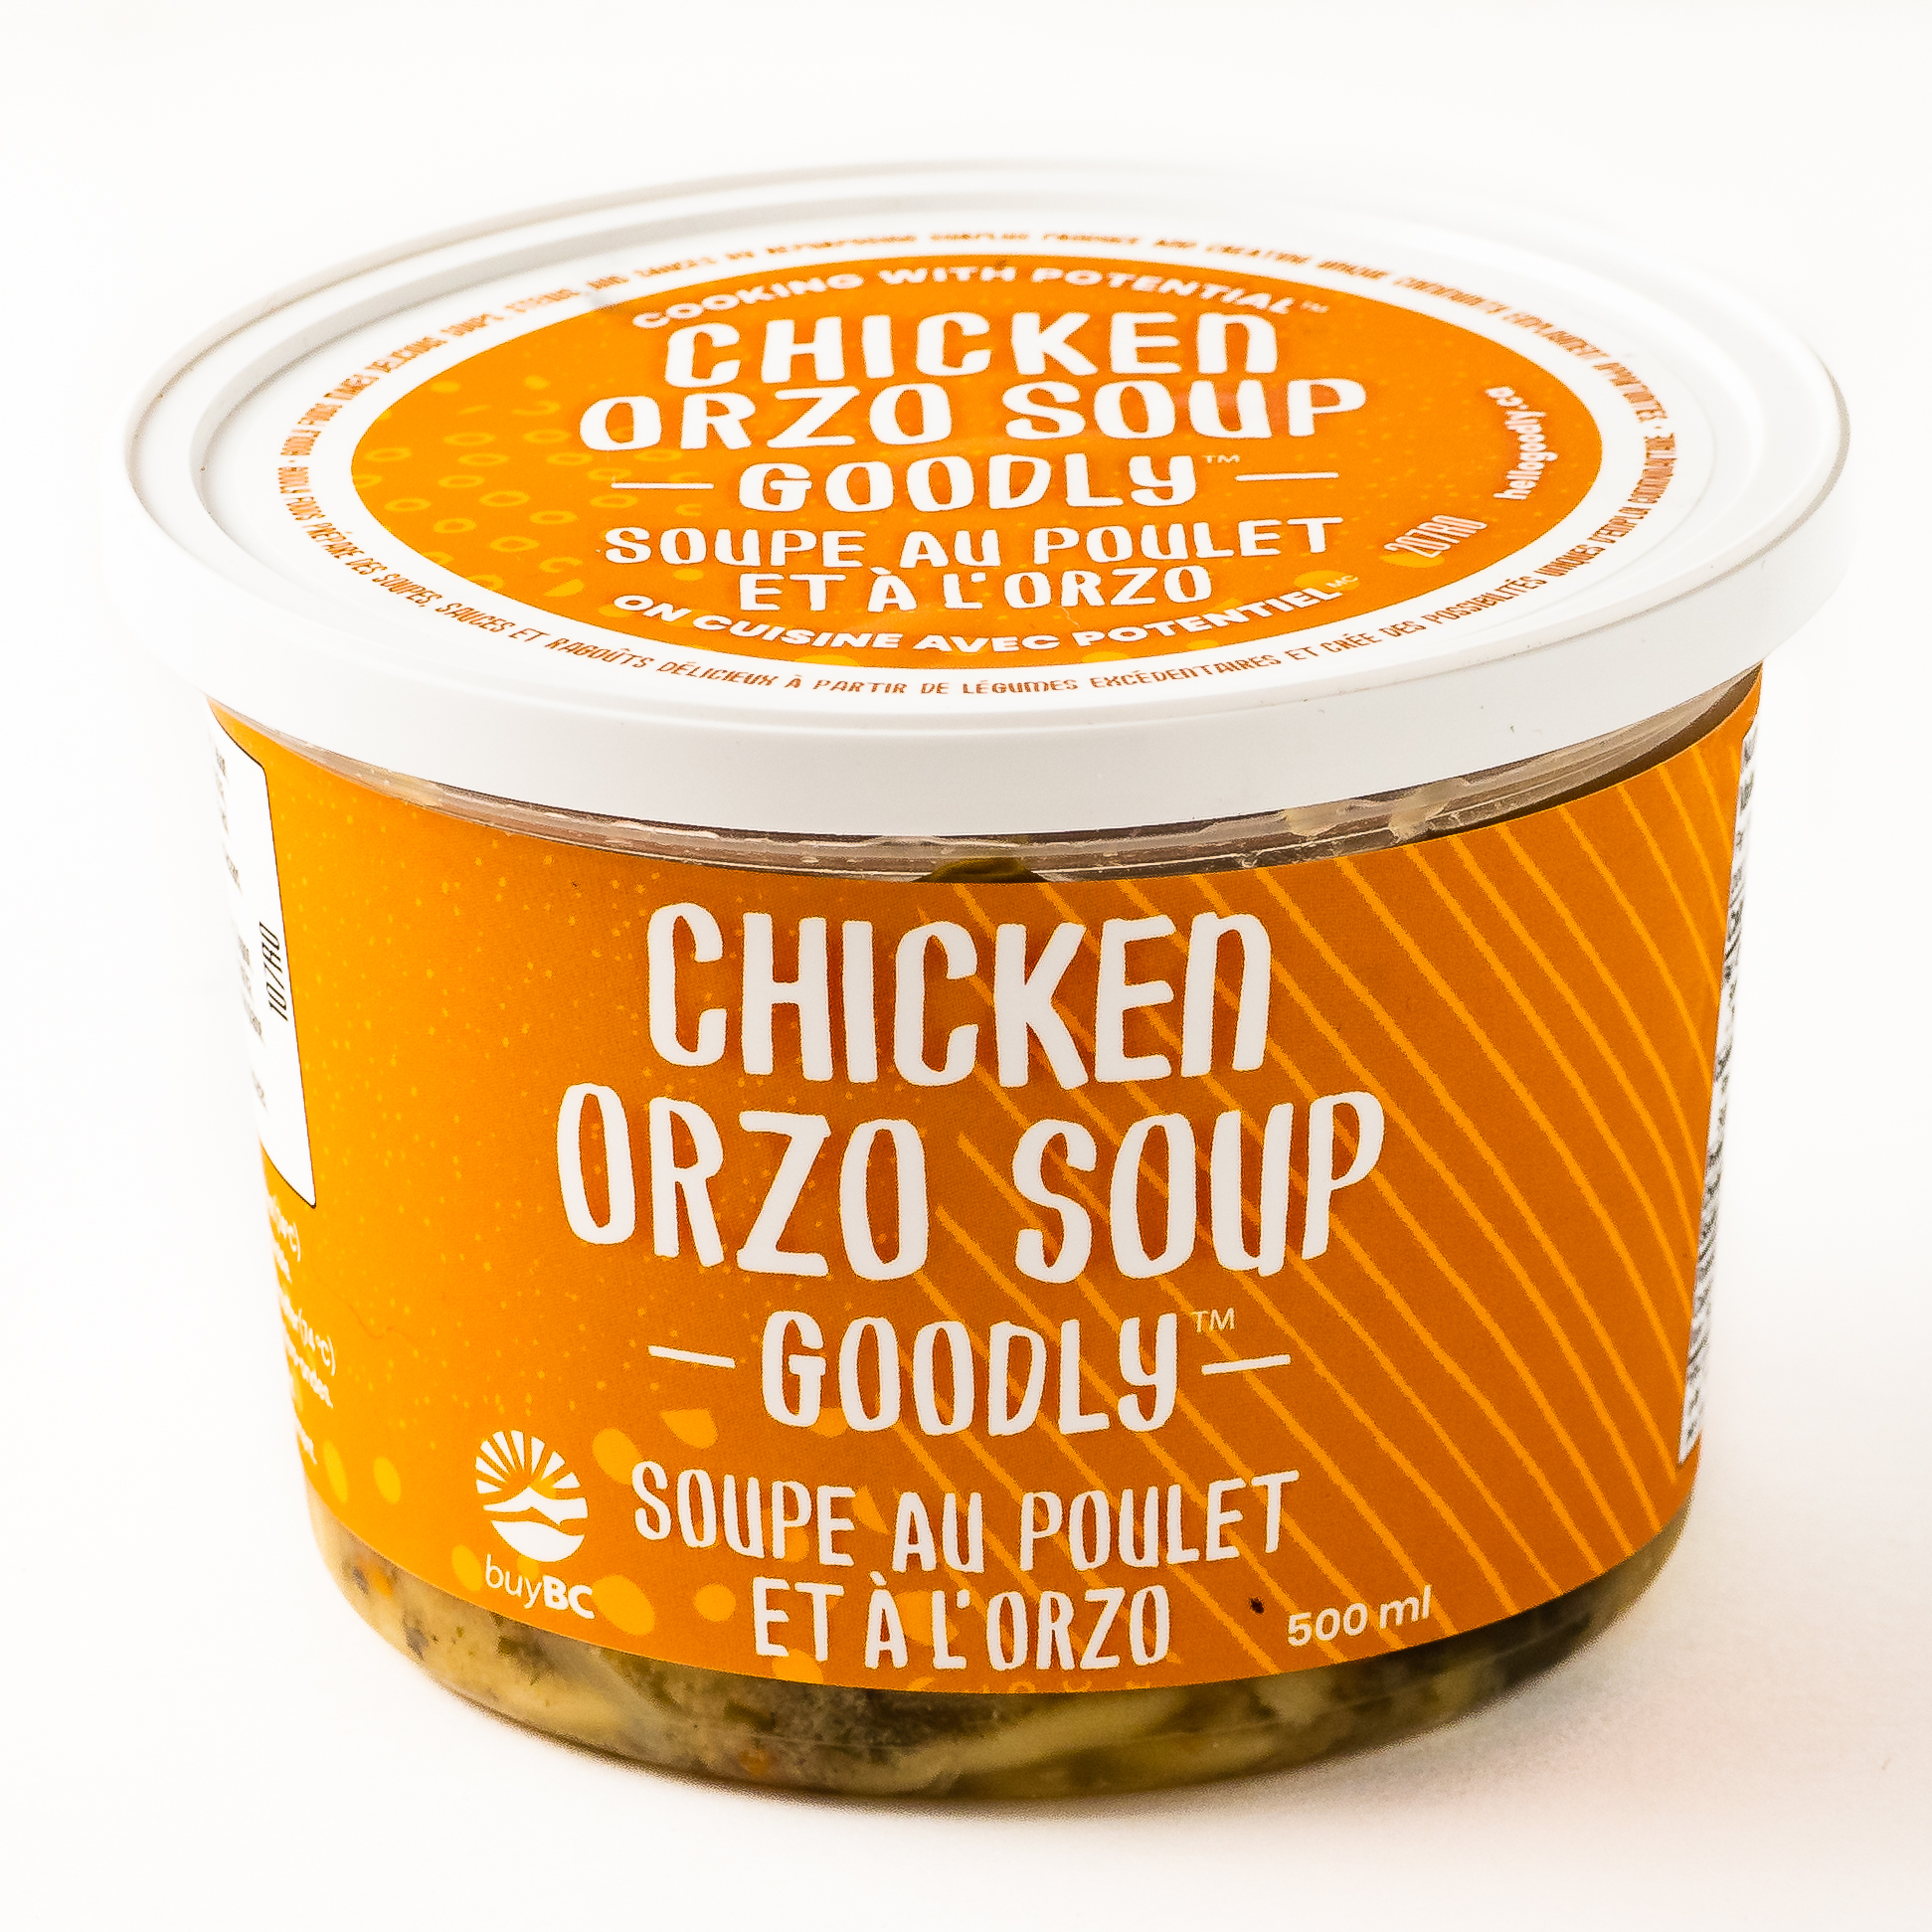 https://goodly.ca/wp-content/uploads/2020/12/Chicken-Orzo-Container-1.jpg